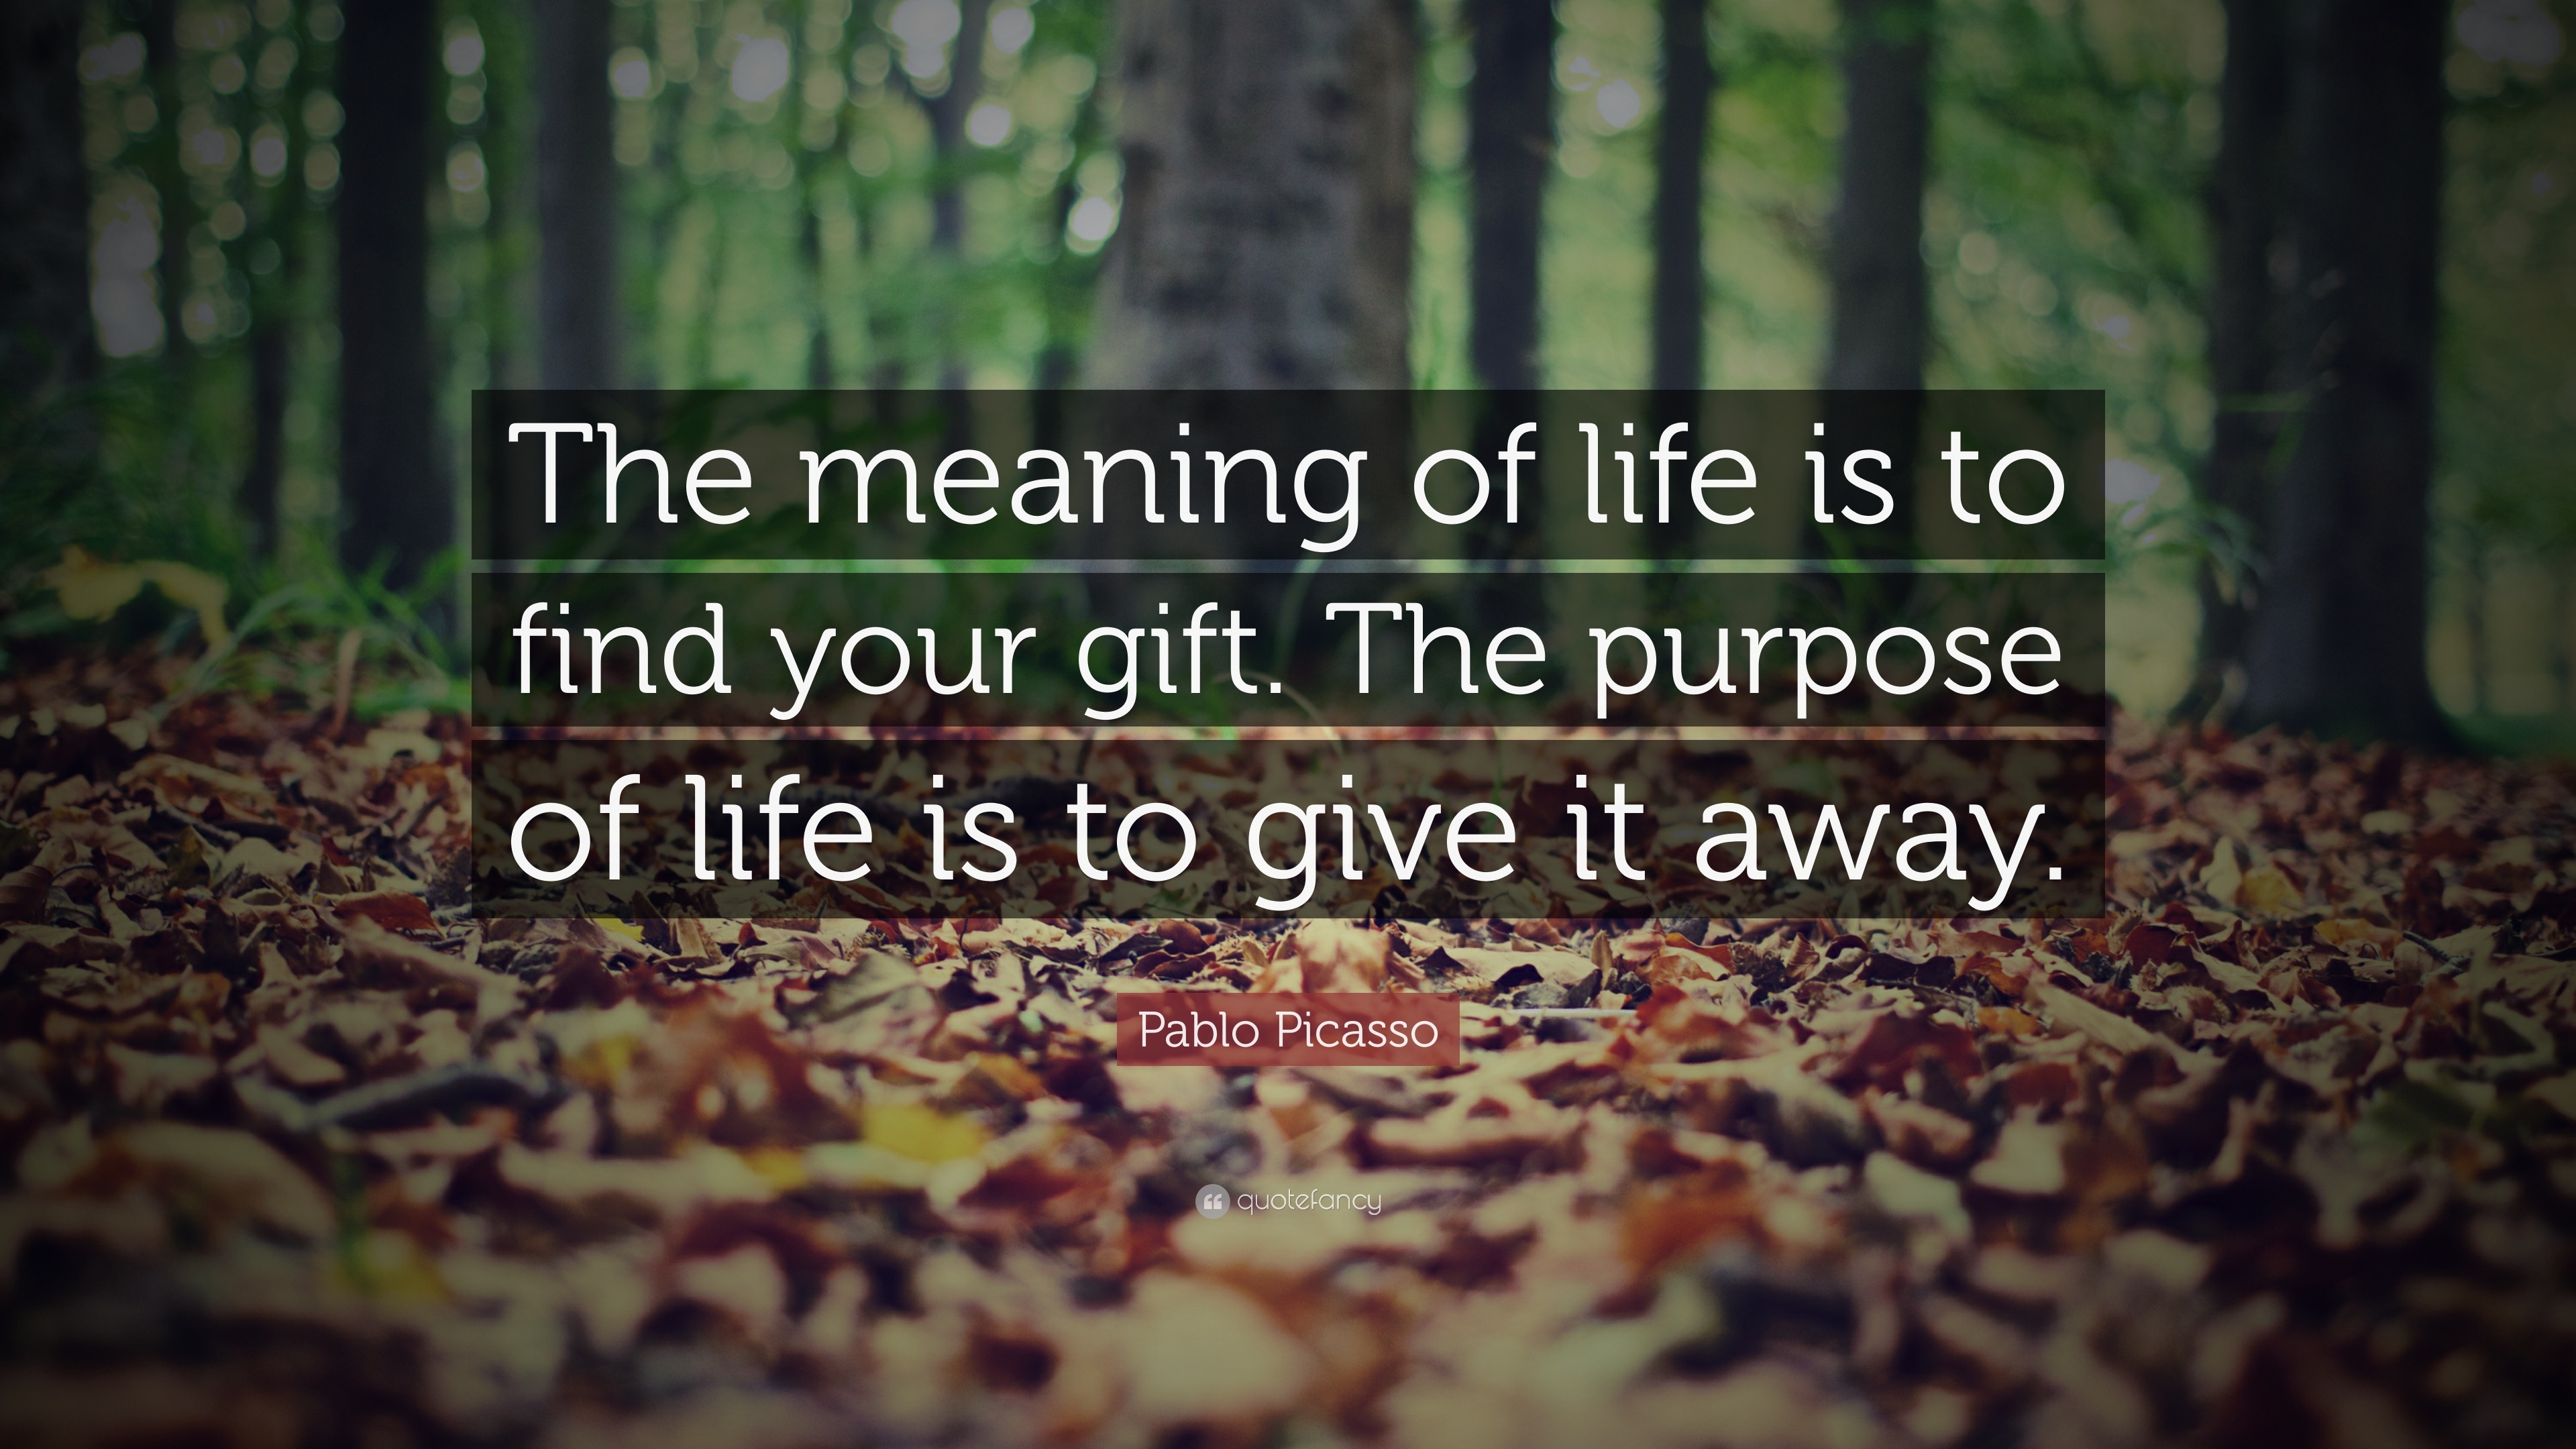 13110 Pablo Picasso Quote The meaning of life is to find your gift The